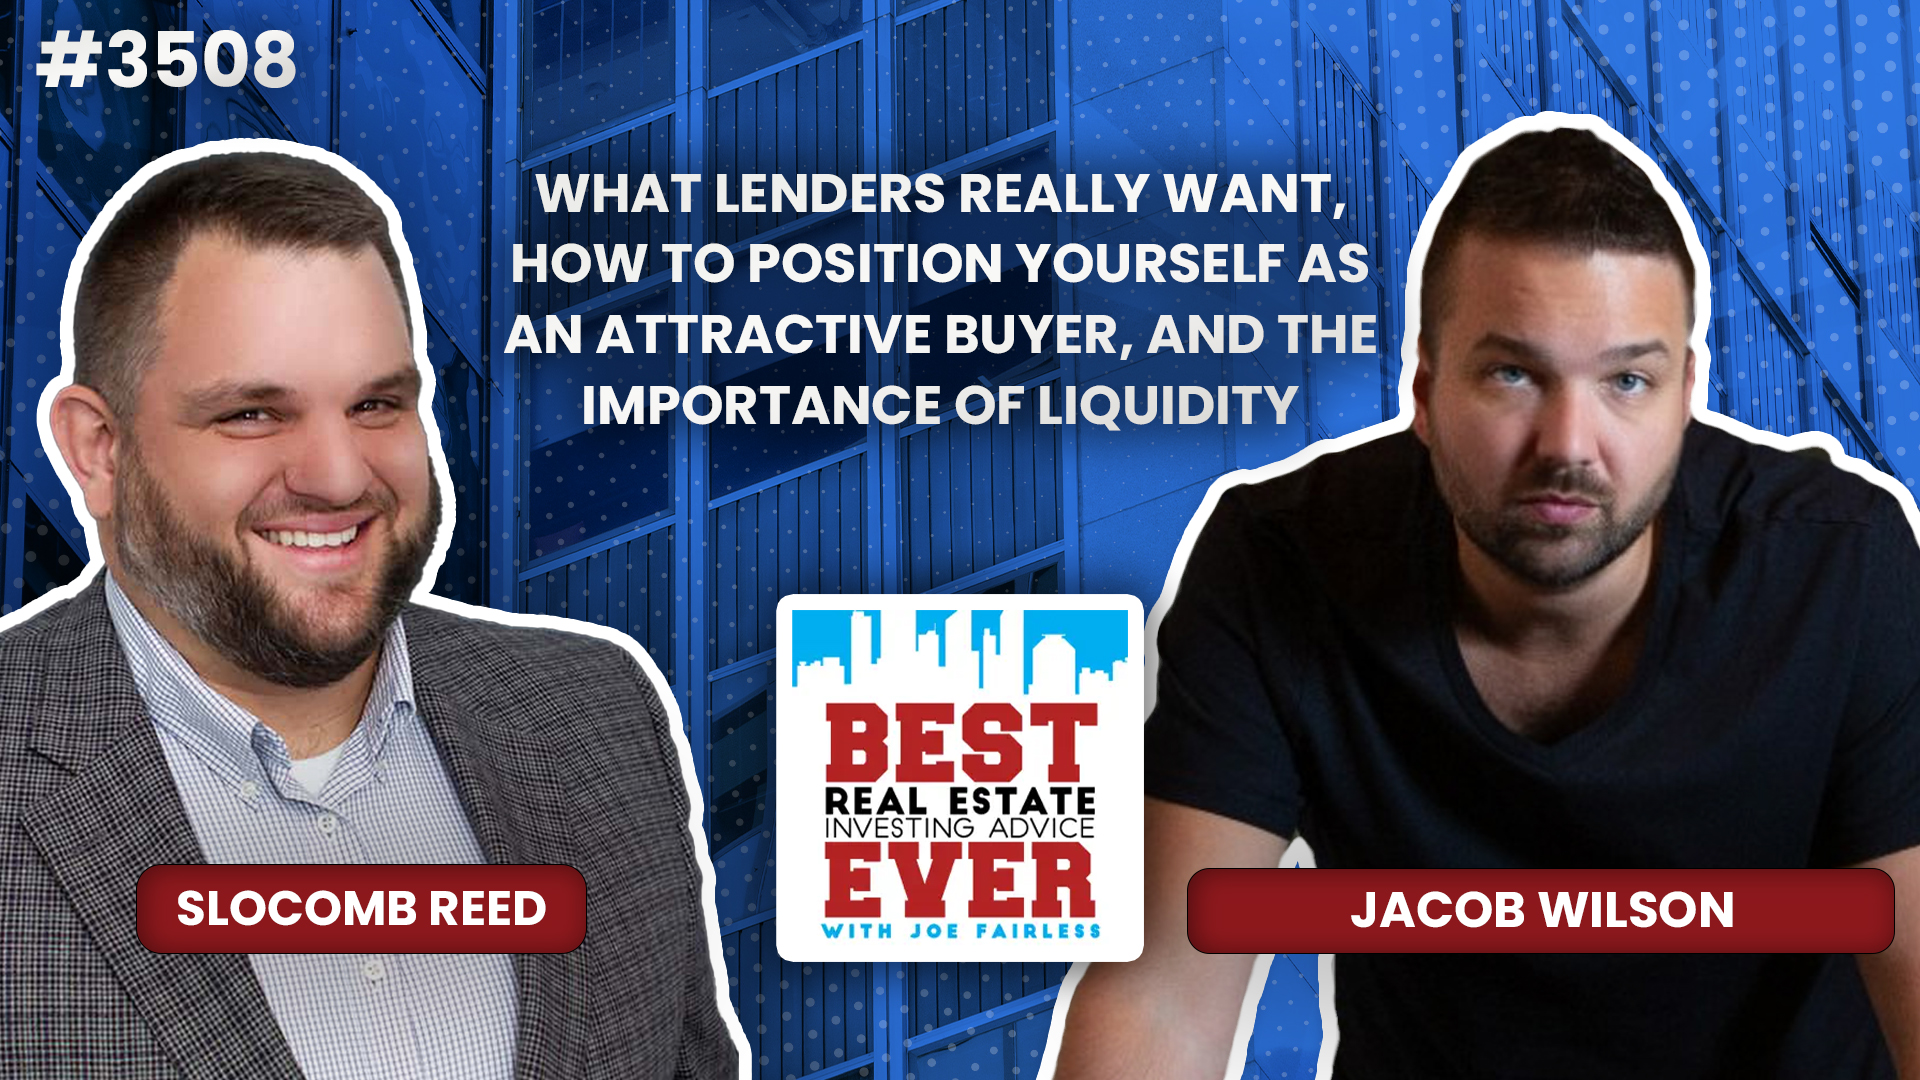 JF3508: What Lenders Really Want, How to Position Yourself as an Attractive Buyer, and the Importance of Liquidity ft. Jacob Wilson